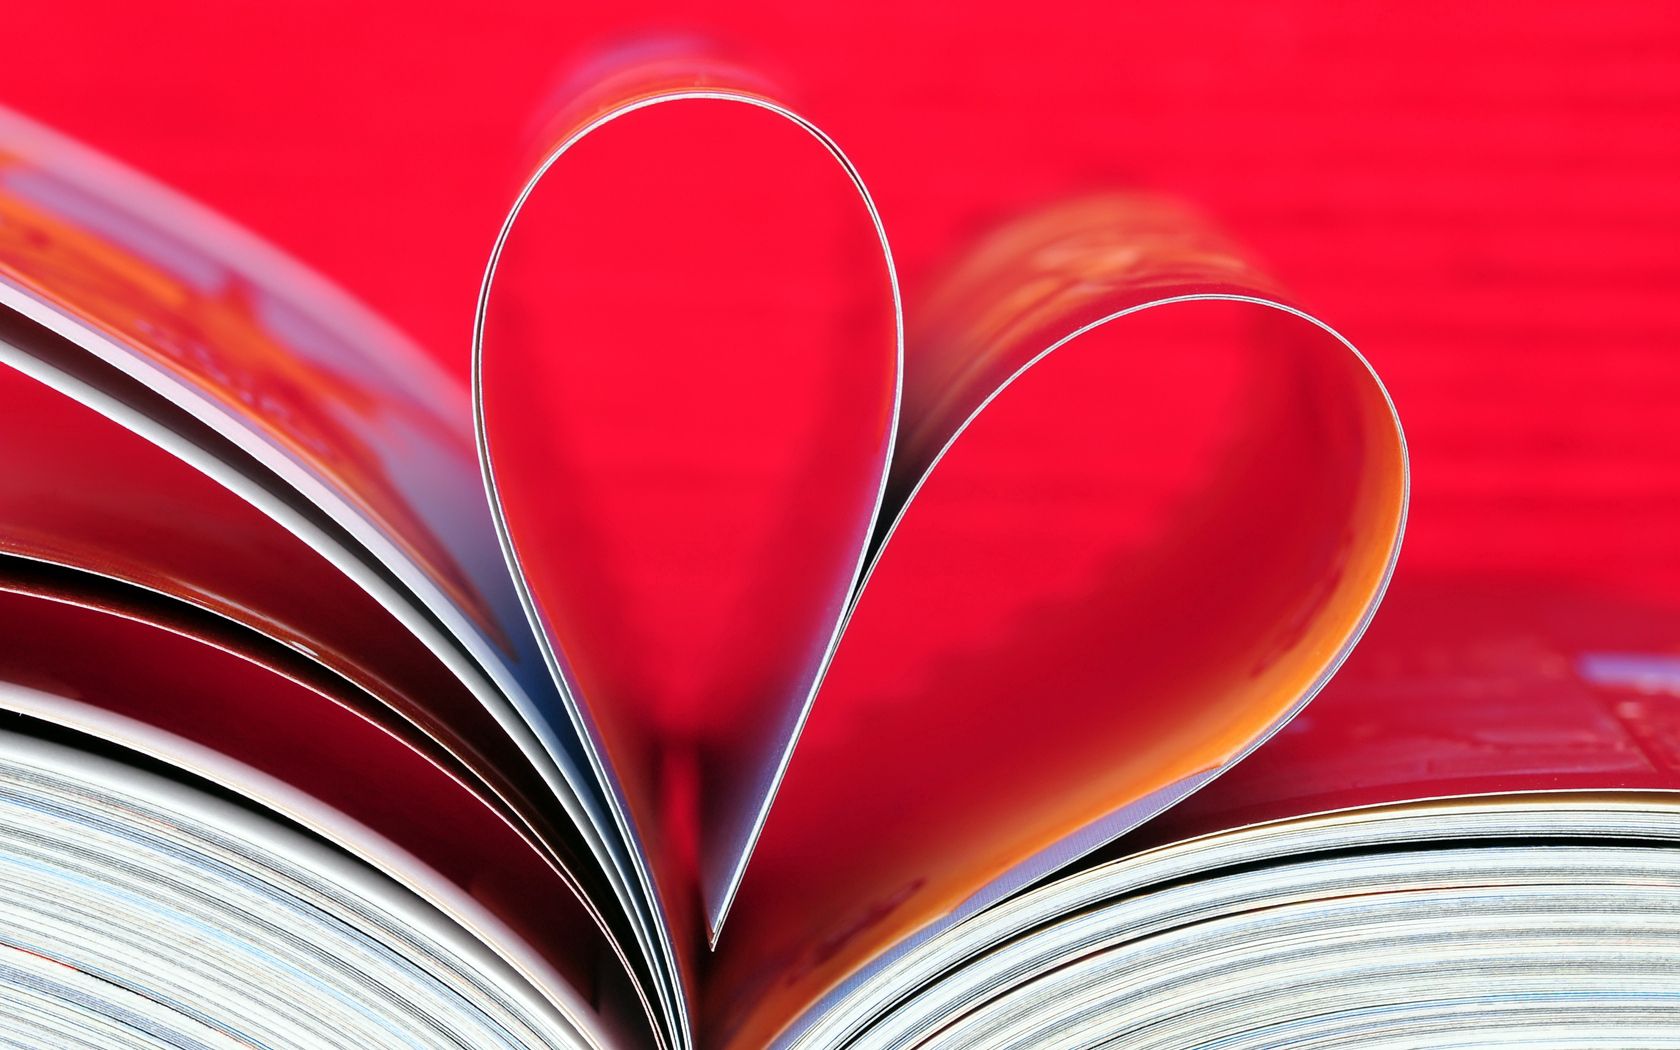 bright, love, pages, heart, book, feelings, page, magazine, journal QHD